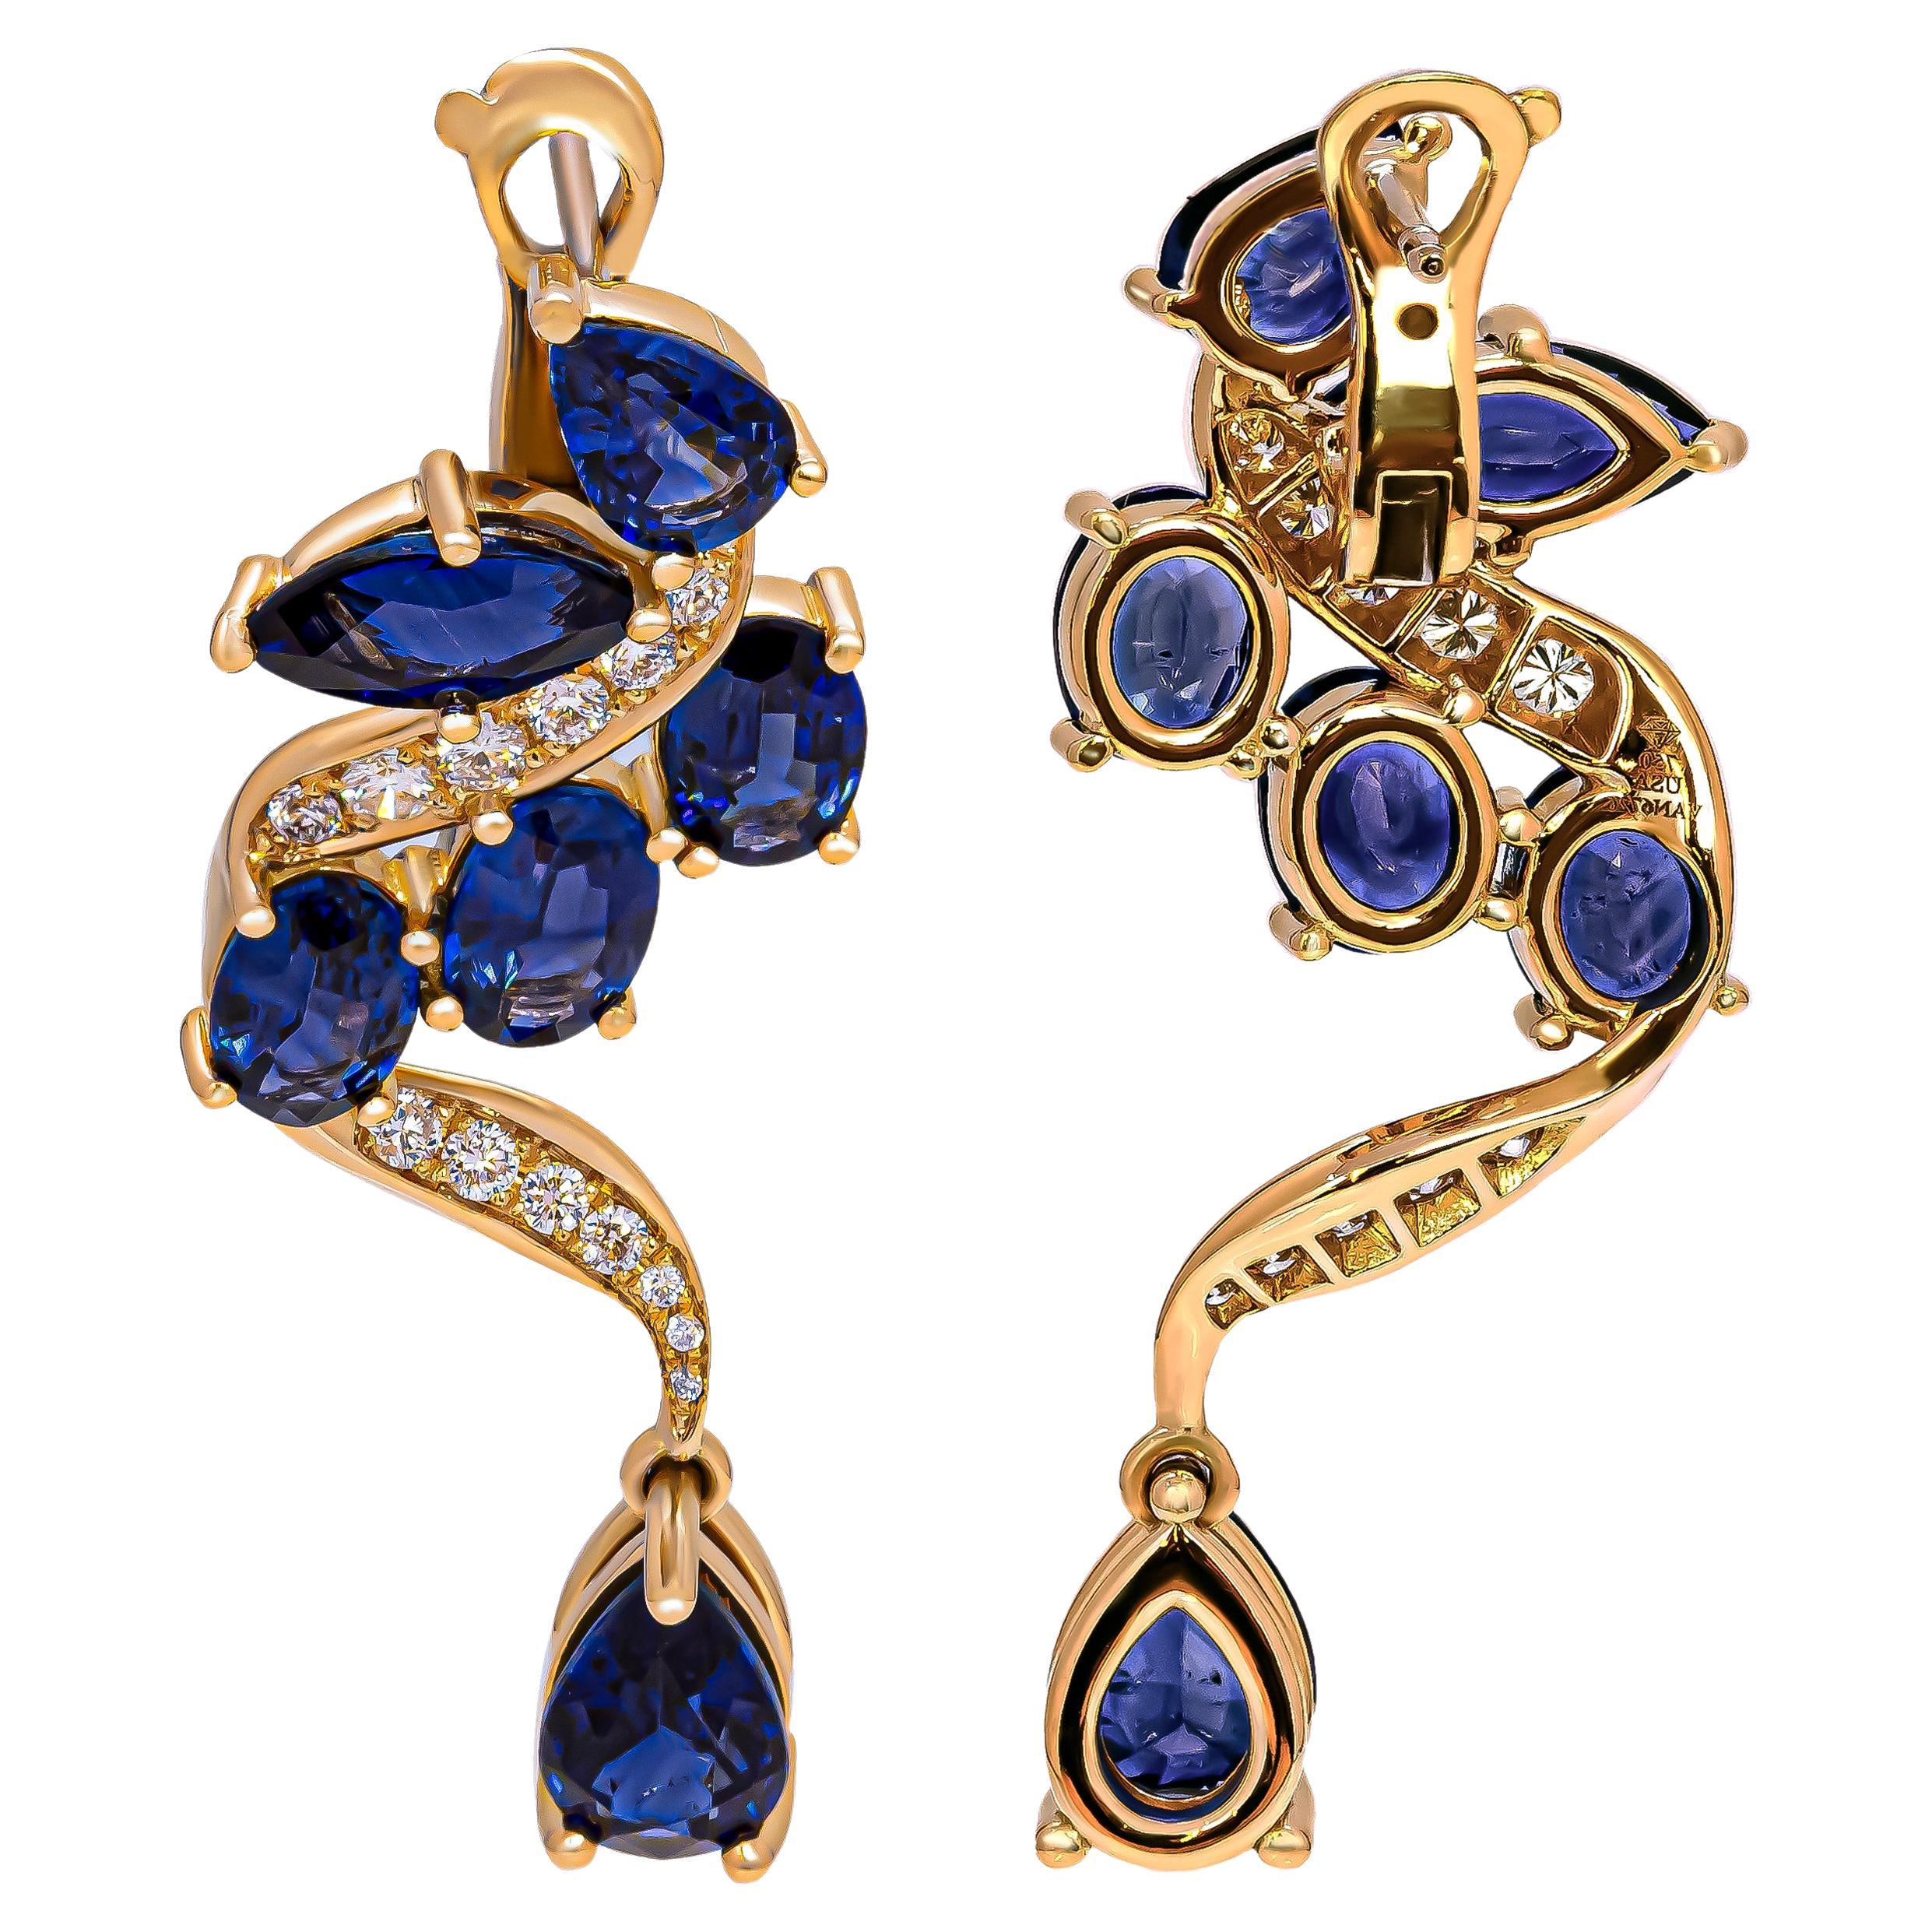 Welcome to our exquisite collection of Drop Earrings crafted in luxurious 18k yellow gold, adorned with the captivating beauty of Blue Sapphires and Diamonds. These elegant earrings showcase a mesmerizing arrangement of gemstones, featuring 6 oval